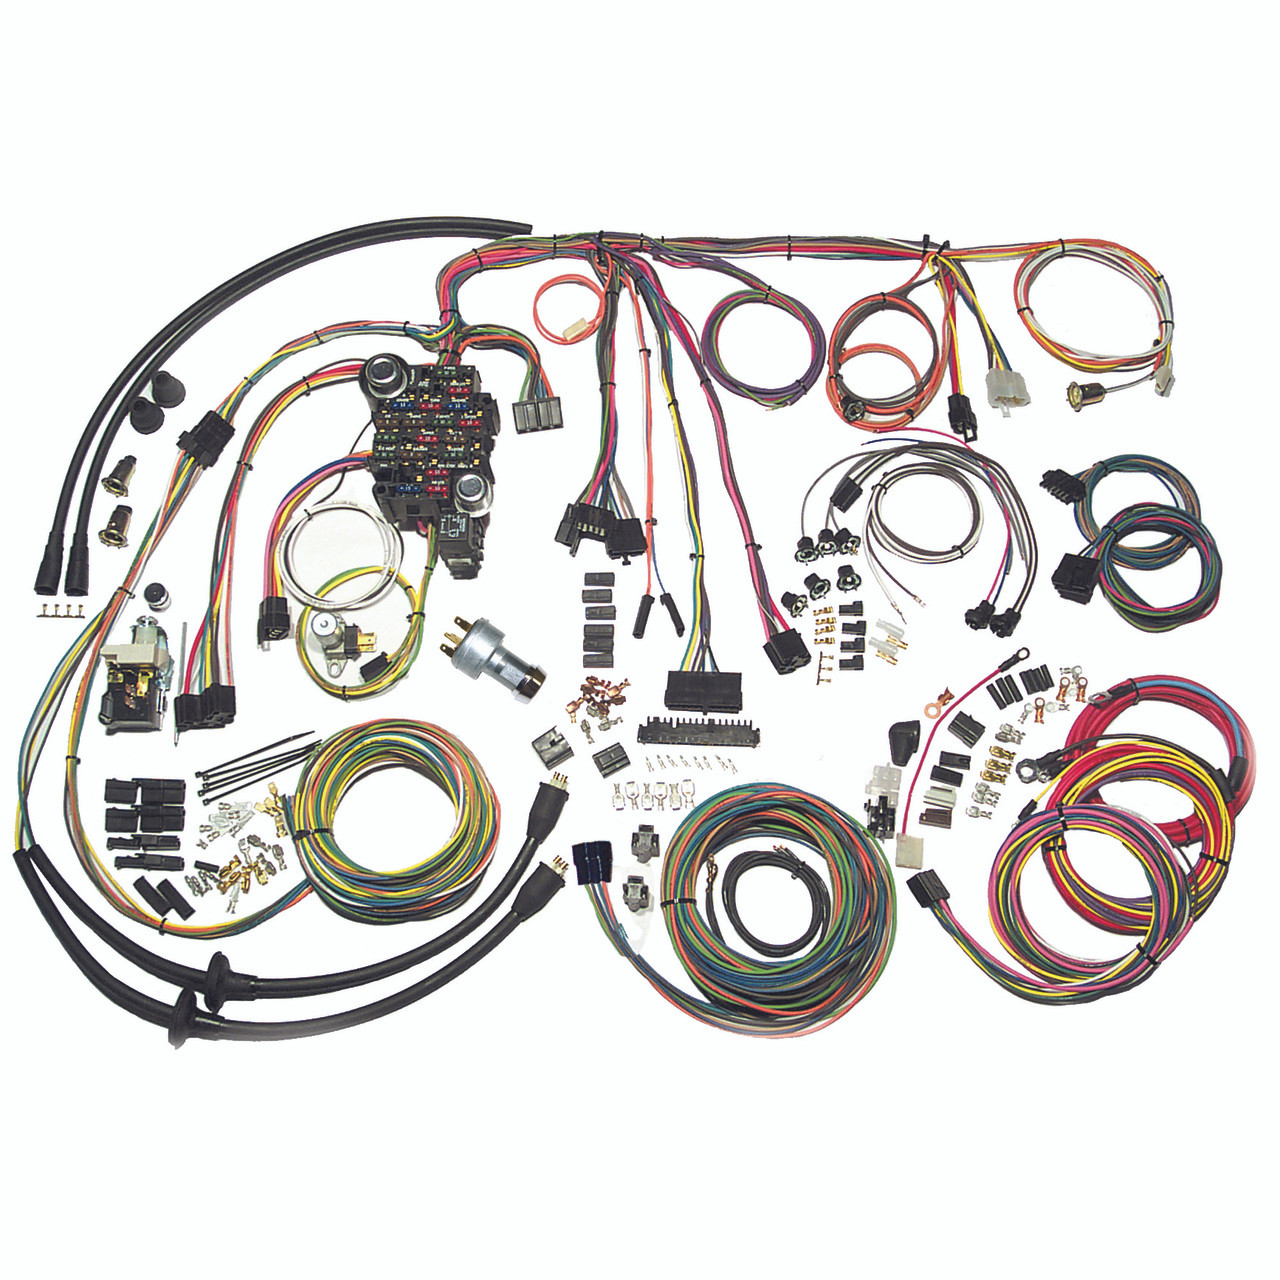 American Autowire 1957 Chevrolet Car "Classic Update" Complete Wiring Kit (AME-500434)